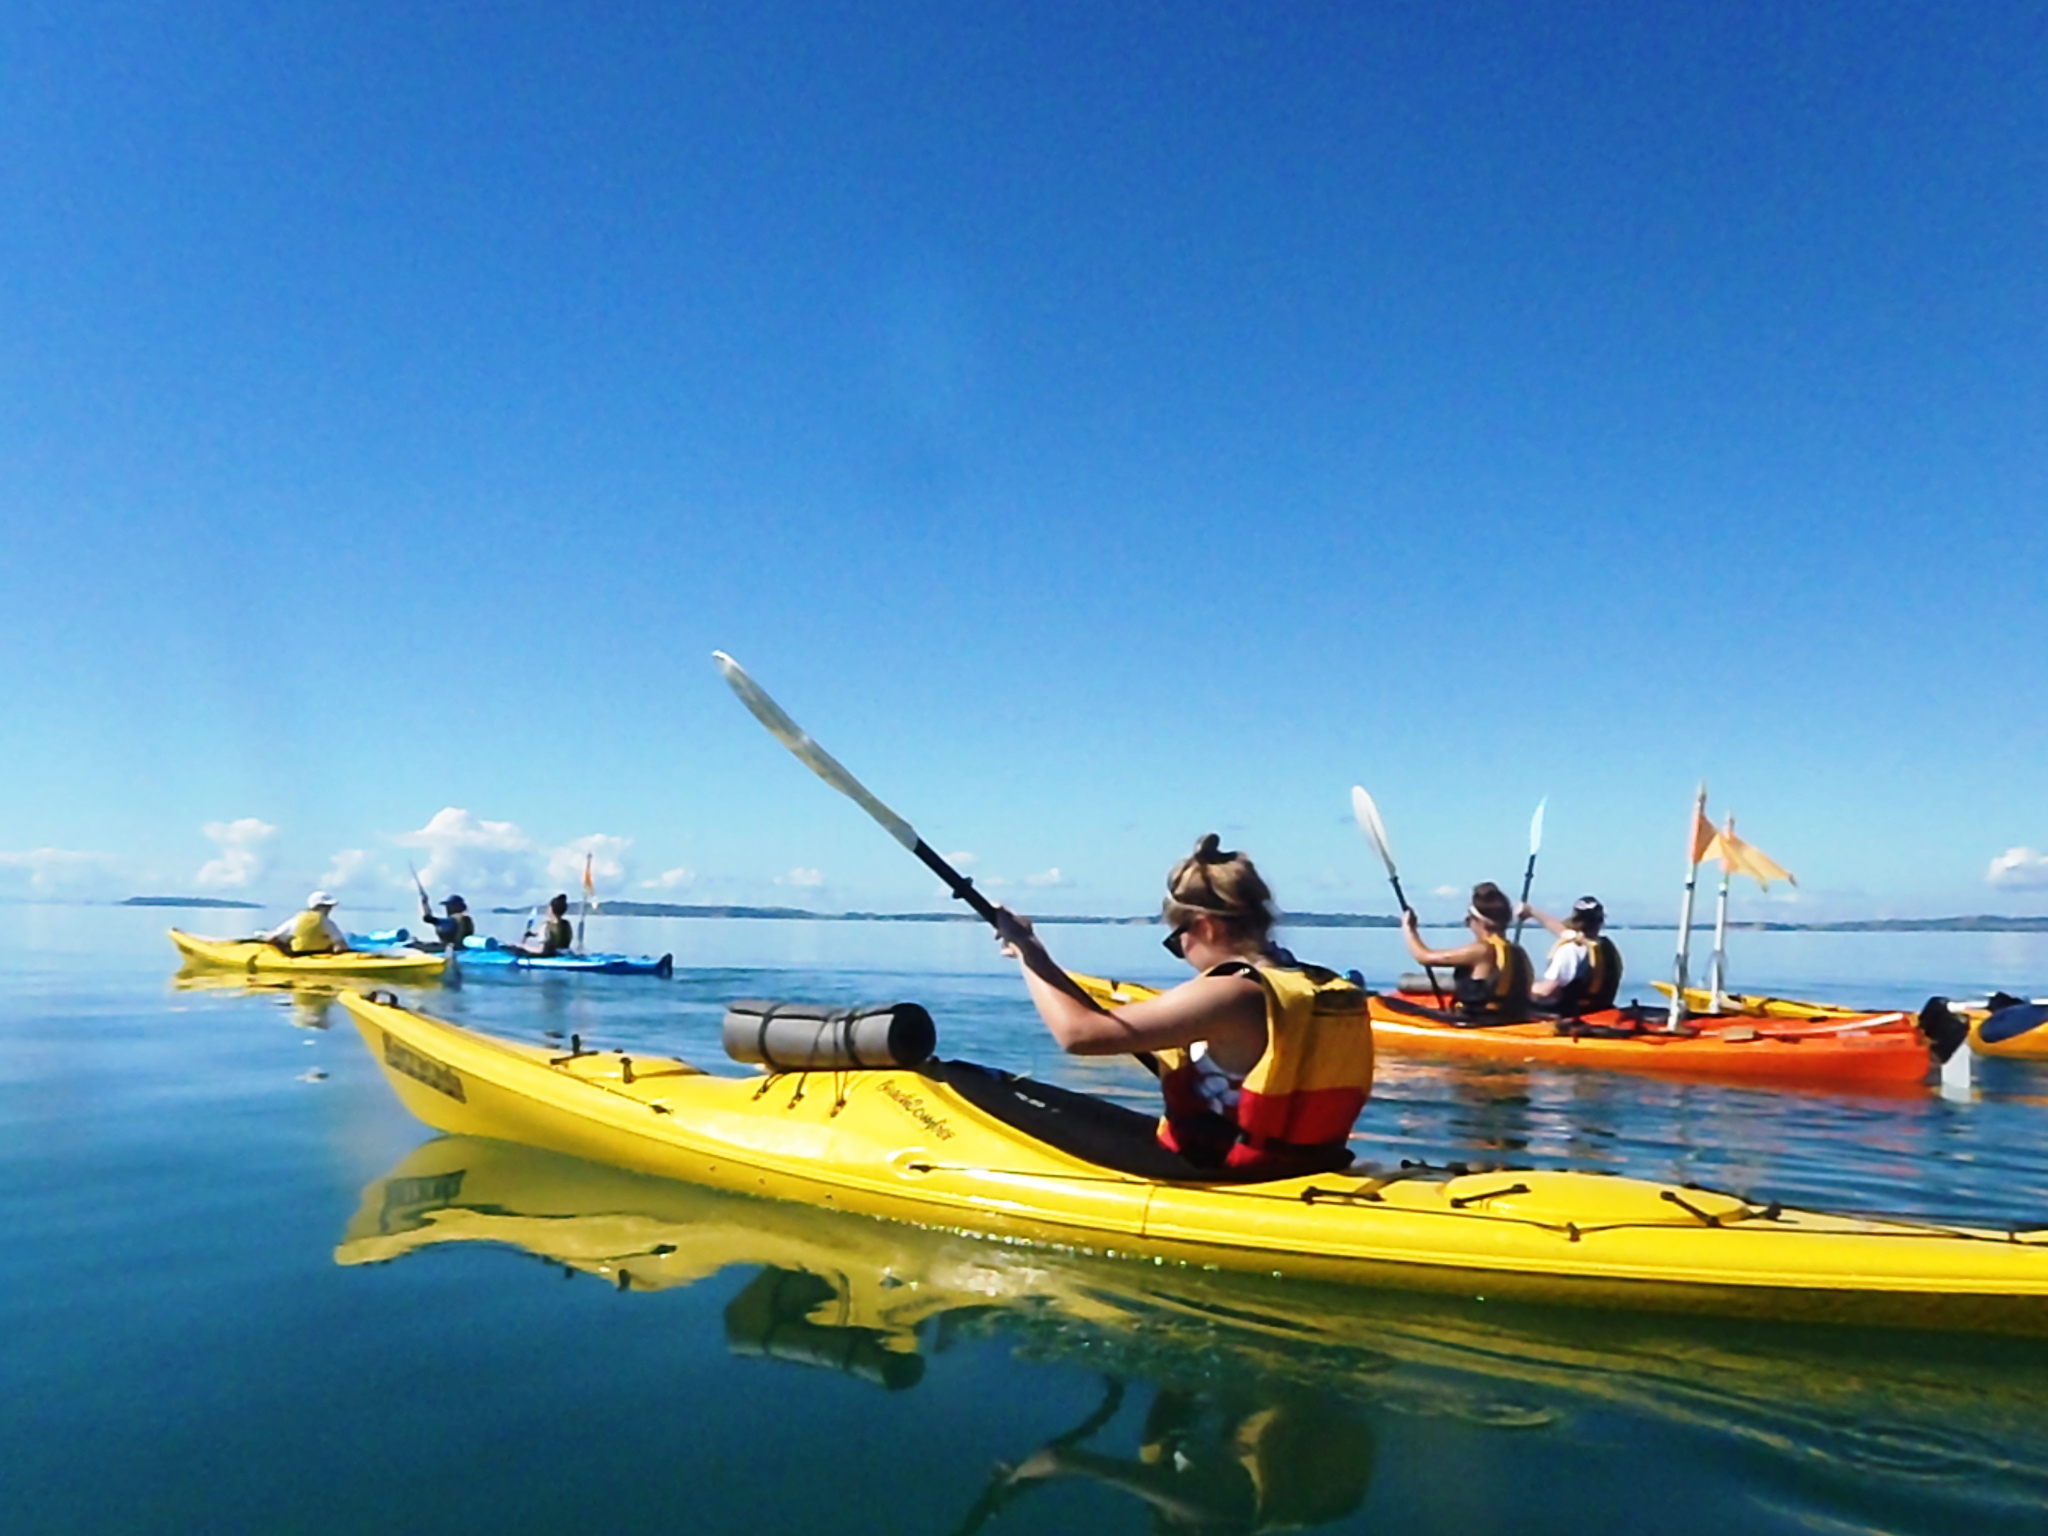 Group of sea kayakers enjoy the pristine calm water